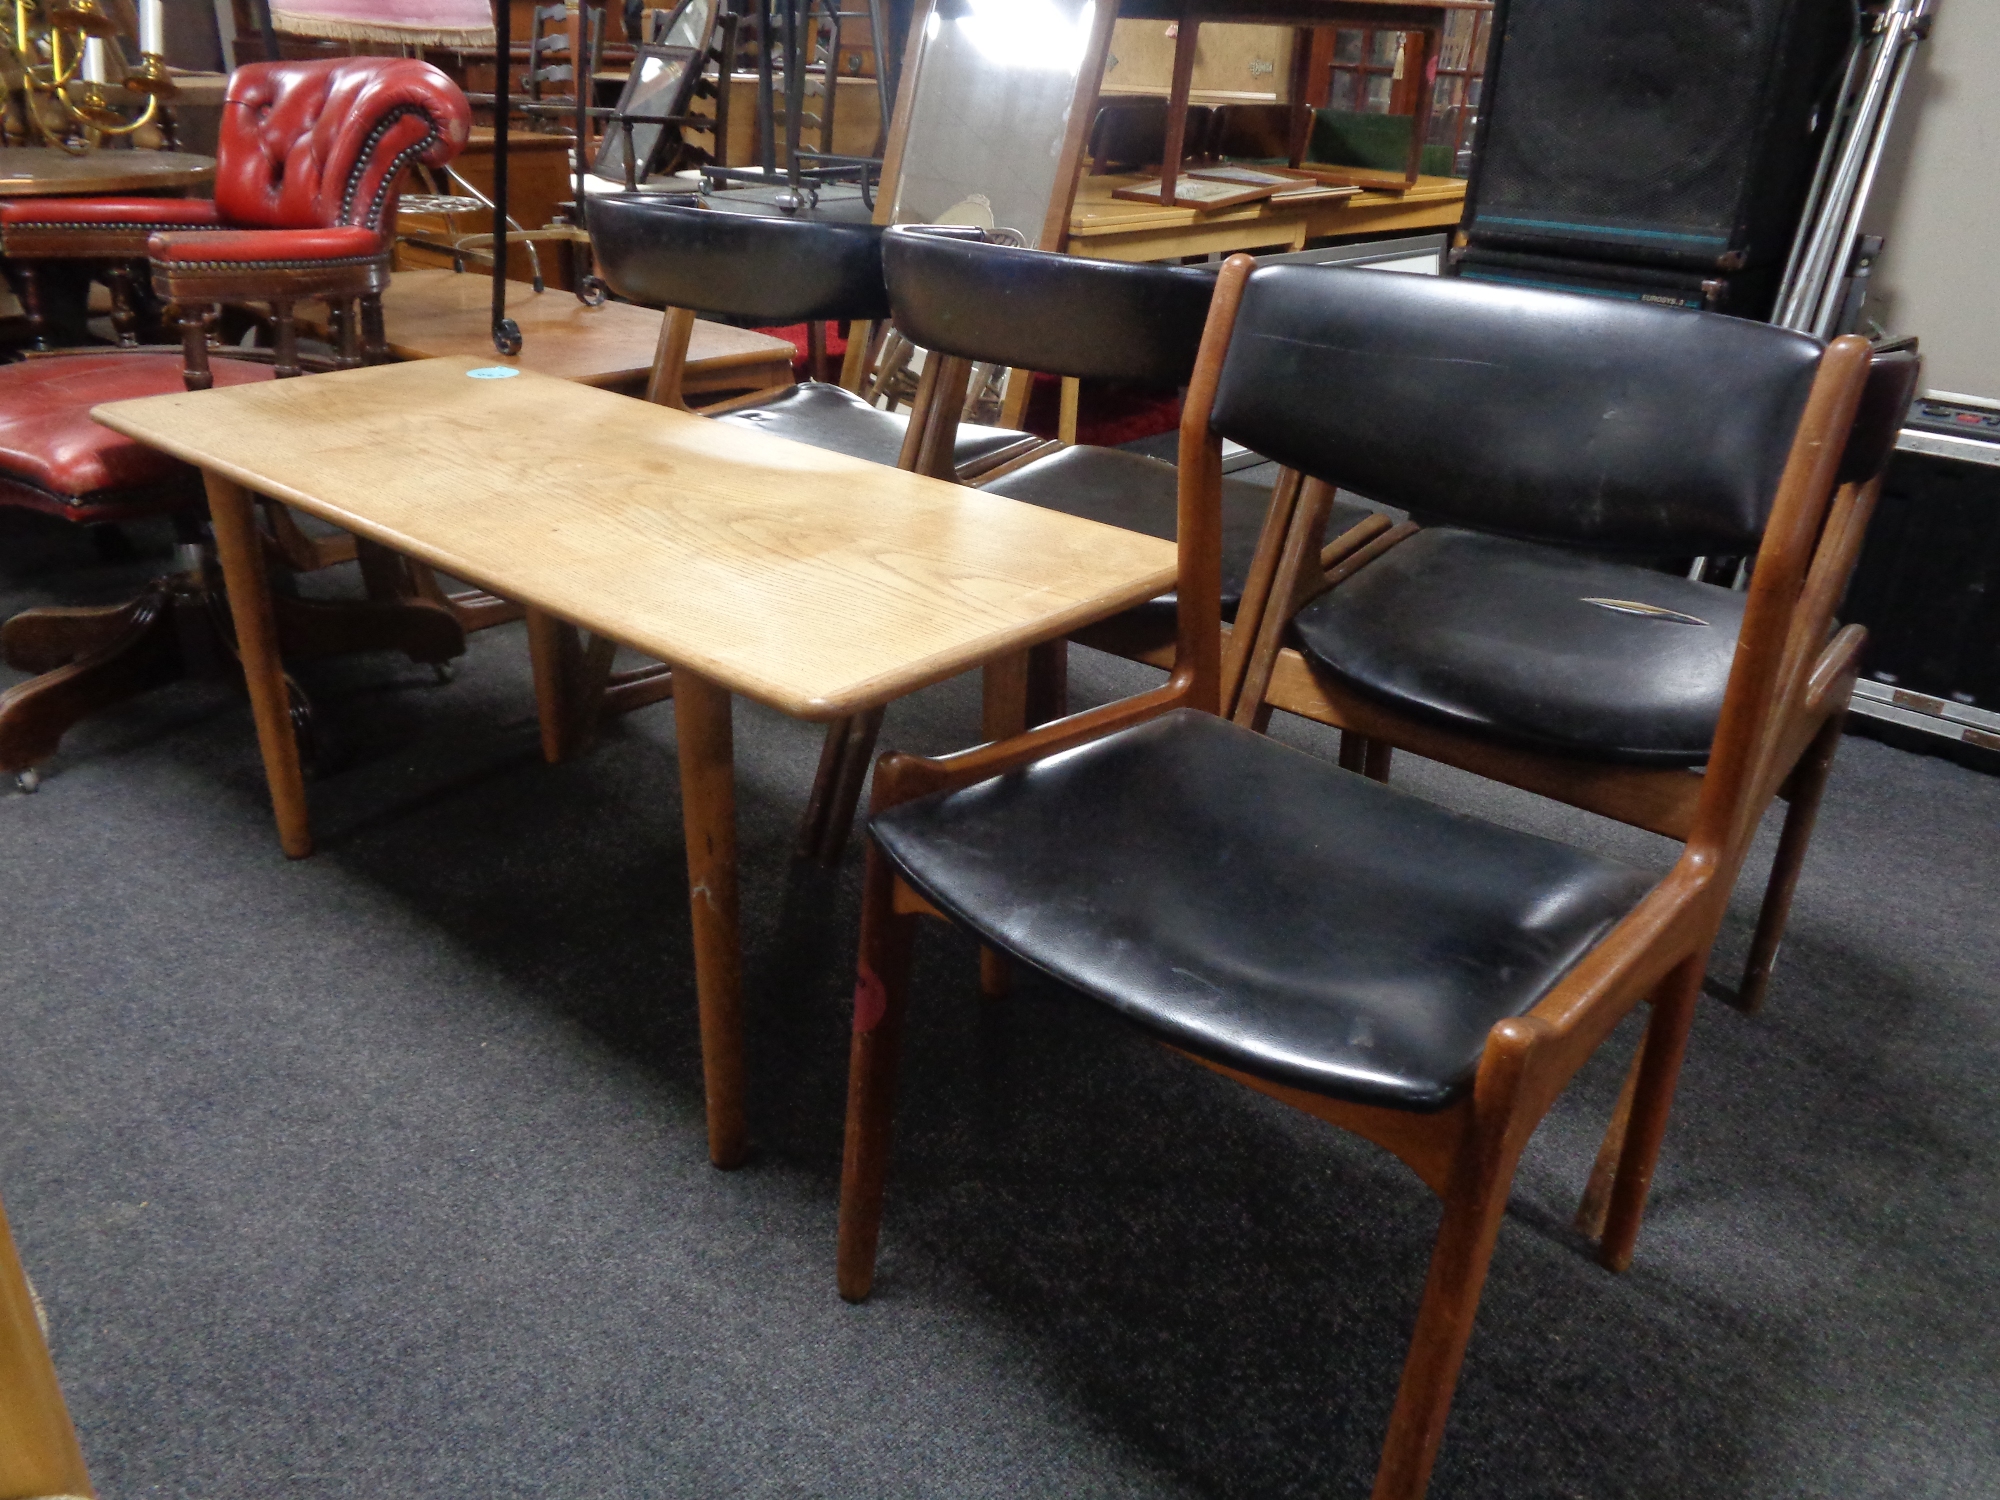 A mid 20th century teak coffee table together with a mid 20th century teak dining chair upholstered